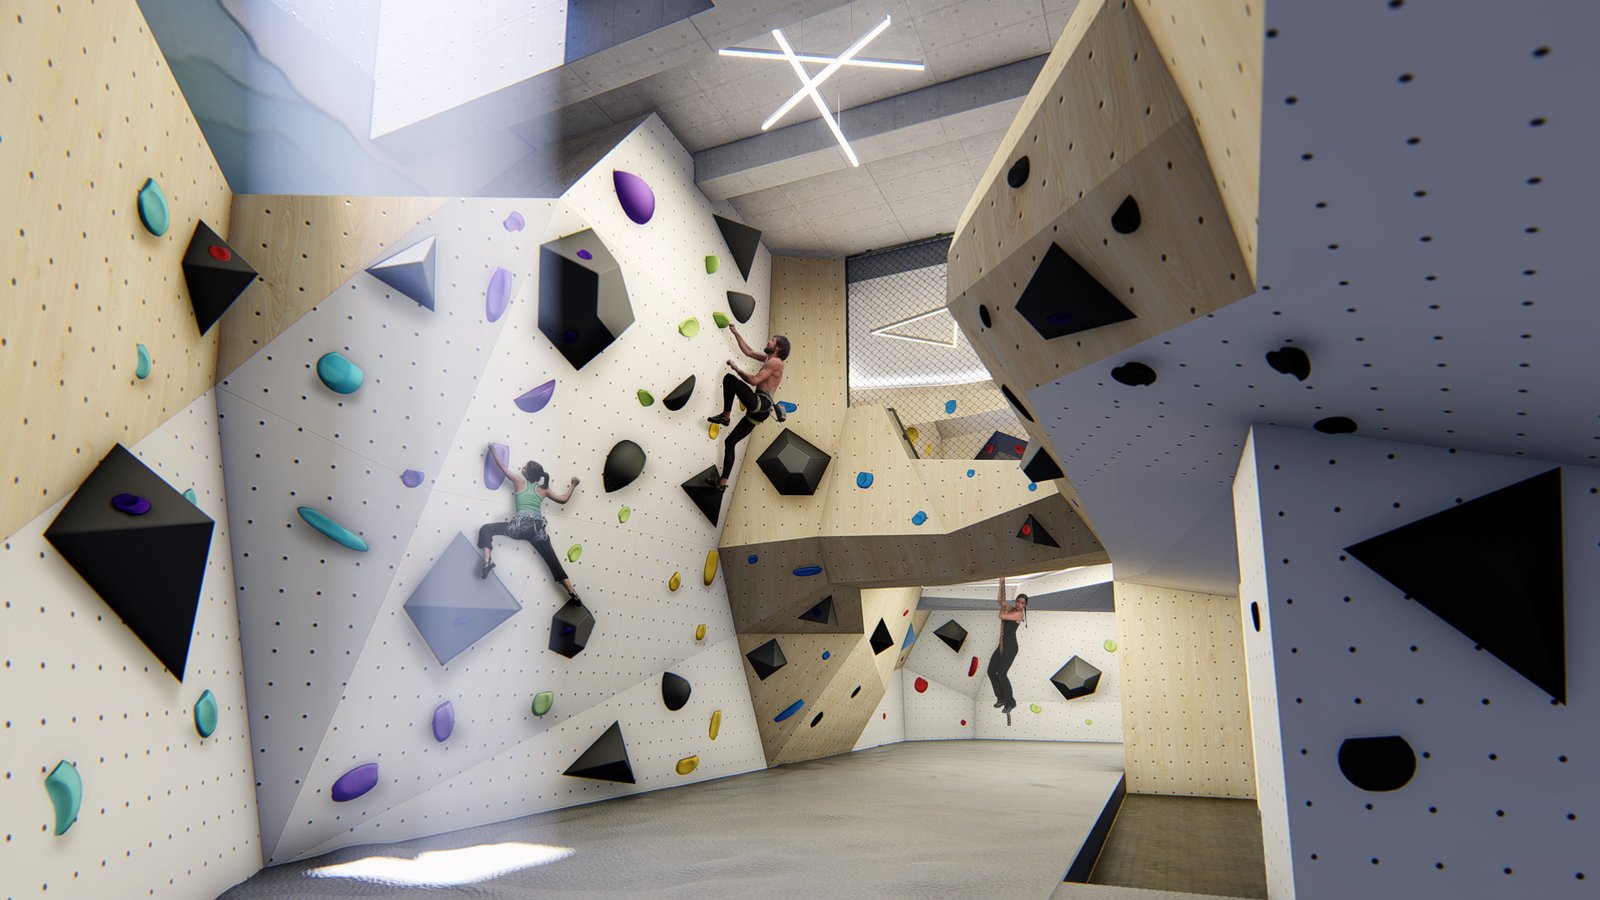 Bouldering and Climbing! This New Gym Will Help You Reach Heights!